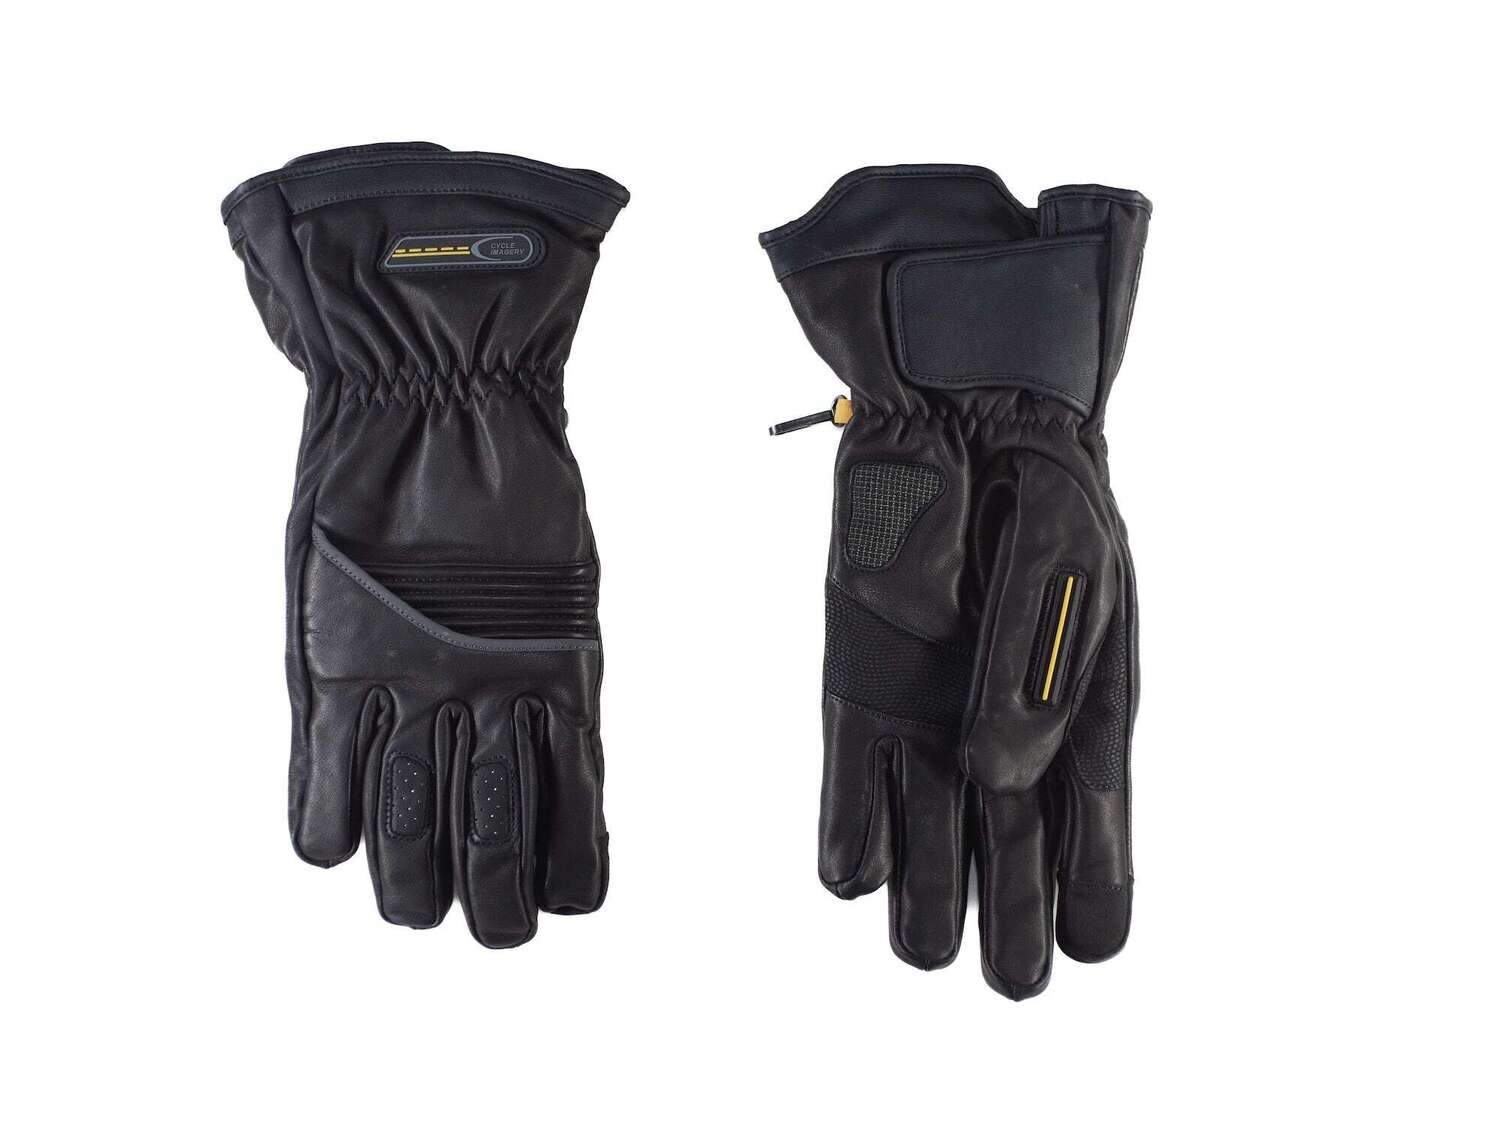 Dublin All Seasons Riding Gloves Contoured Touch Screen Compatible 